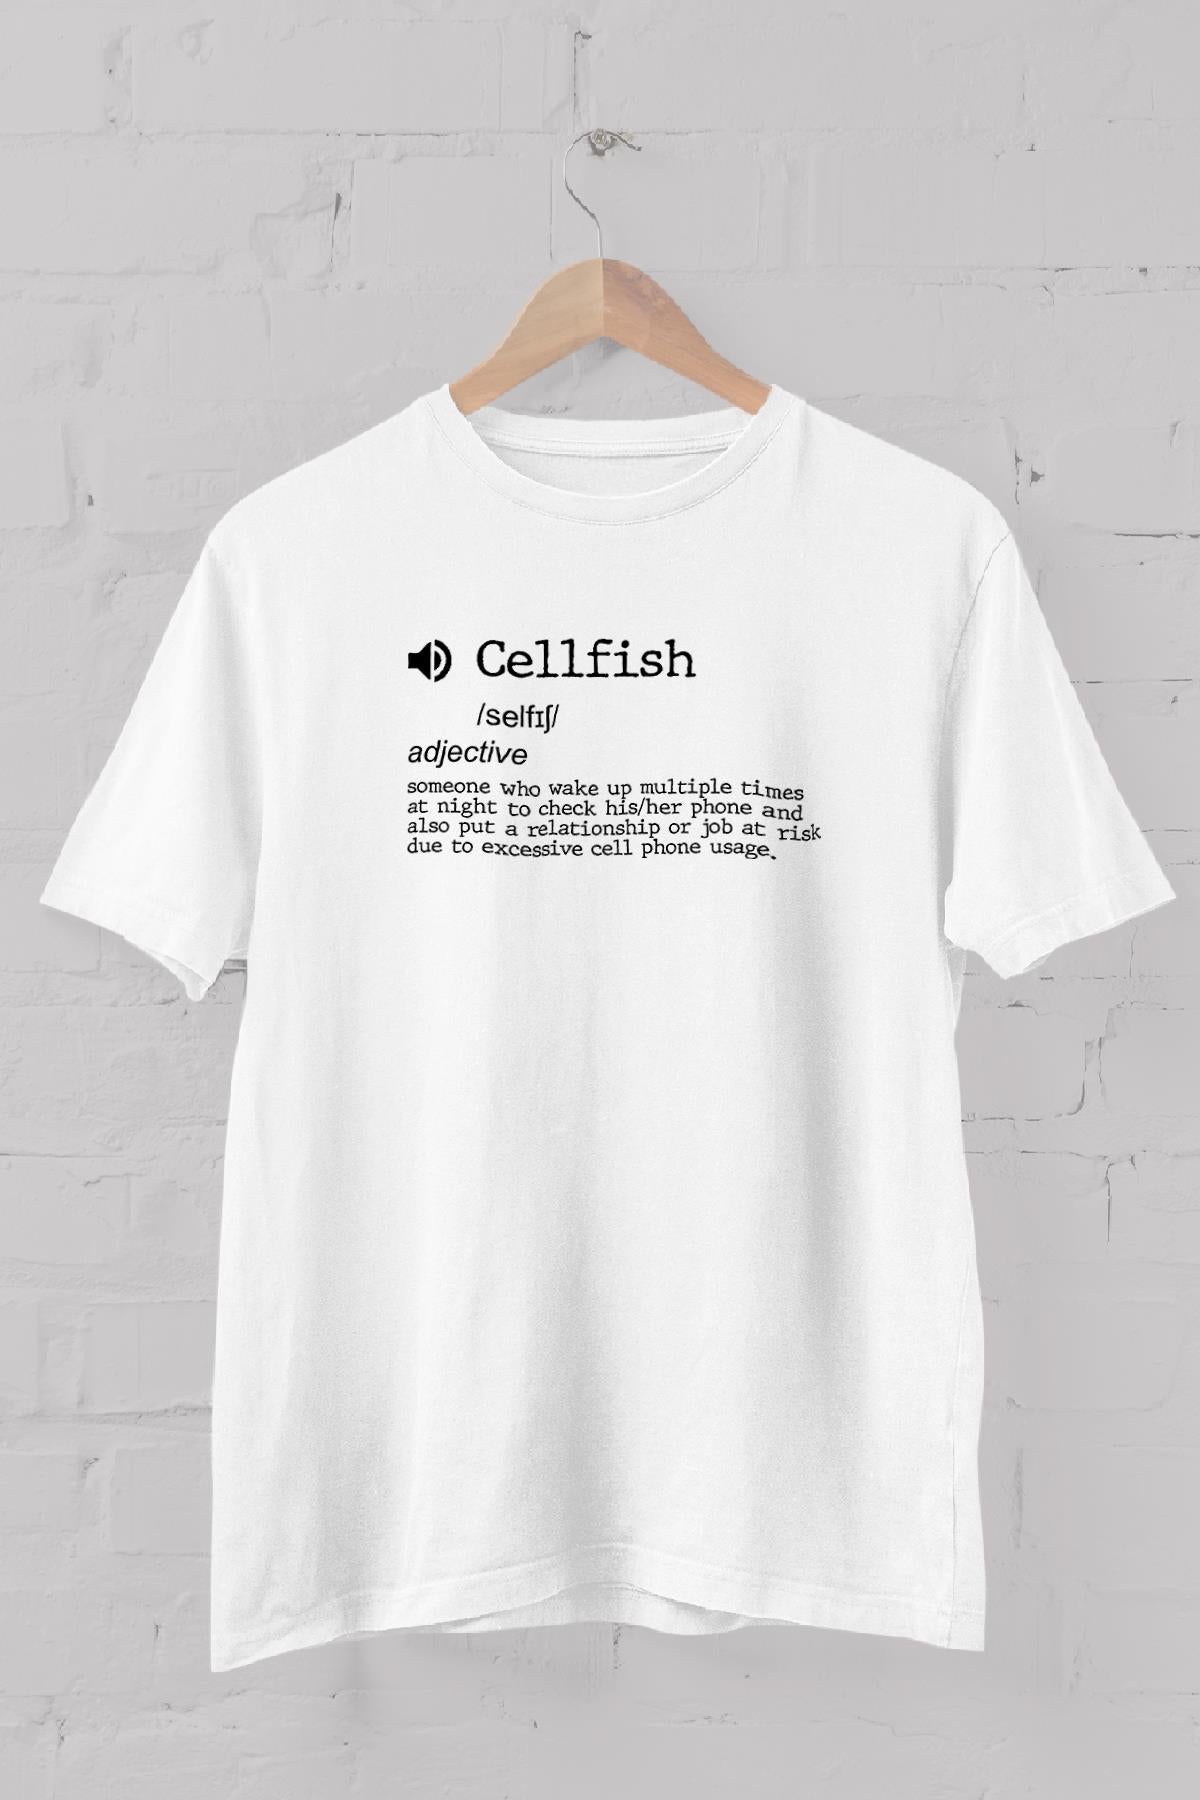 Fixed Words Dictionary "Cellfish" printed Crew Neck men's t -shirt